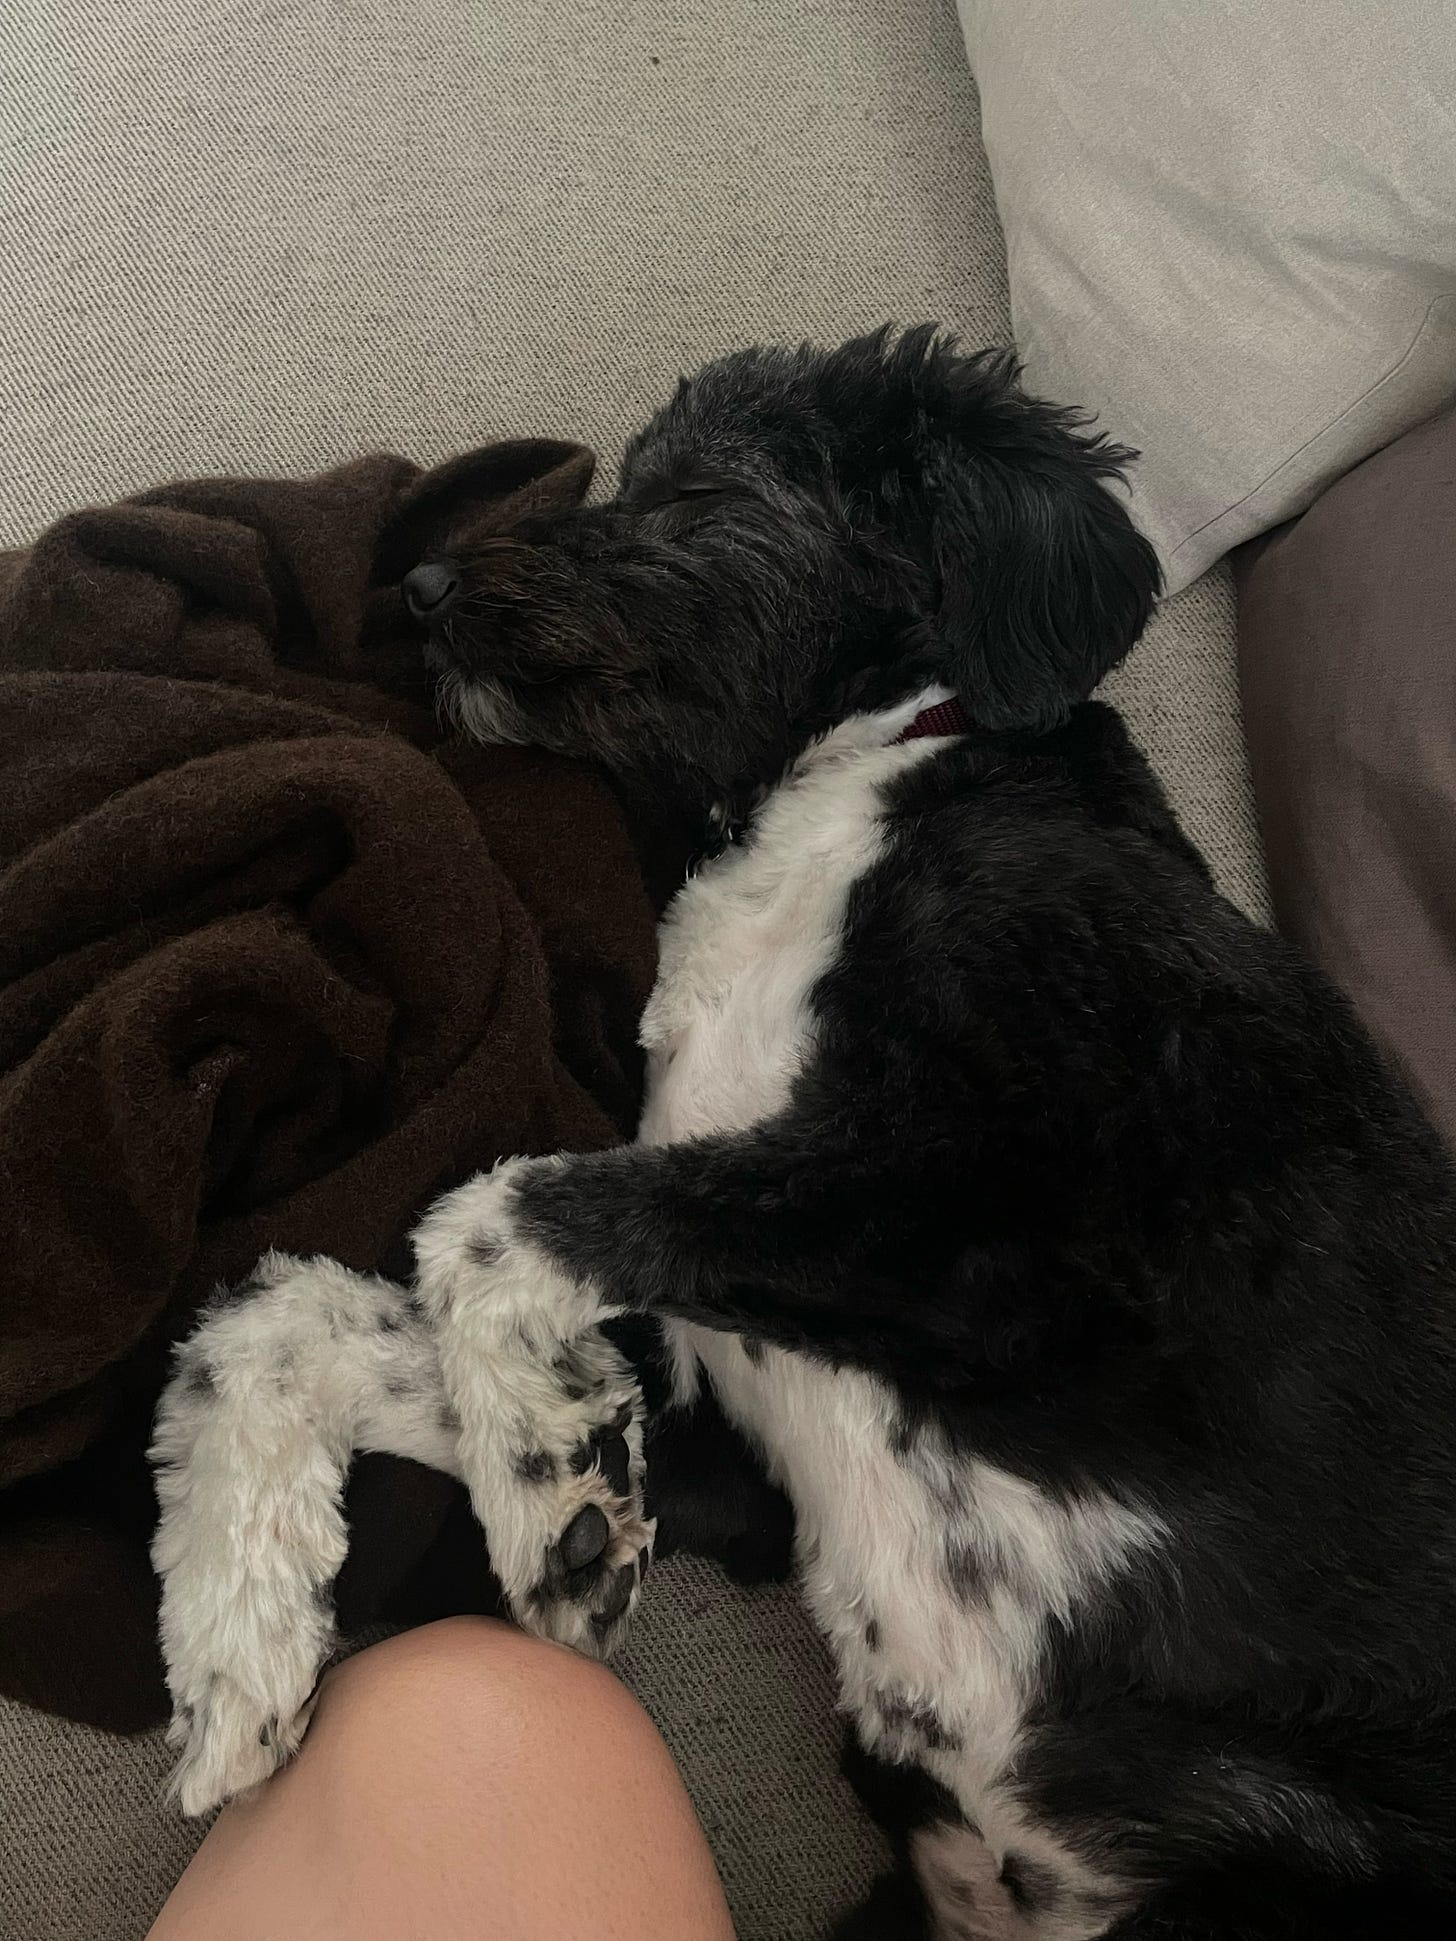 A black and white dog sleeping on its side with its paws just grazing a person's knee.